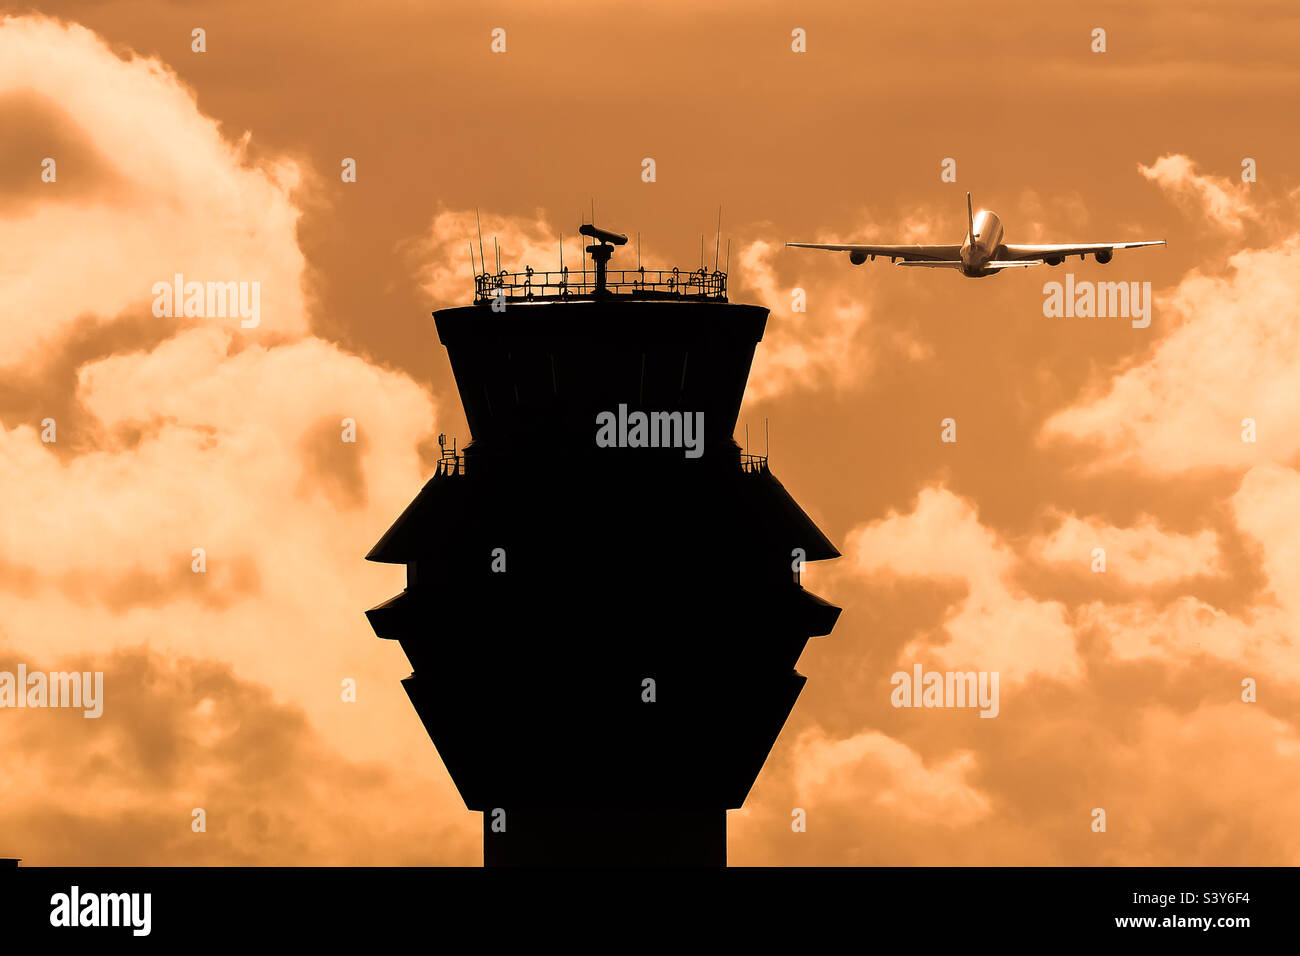 Airport ATC tower and plane airborne. Stock Photo